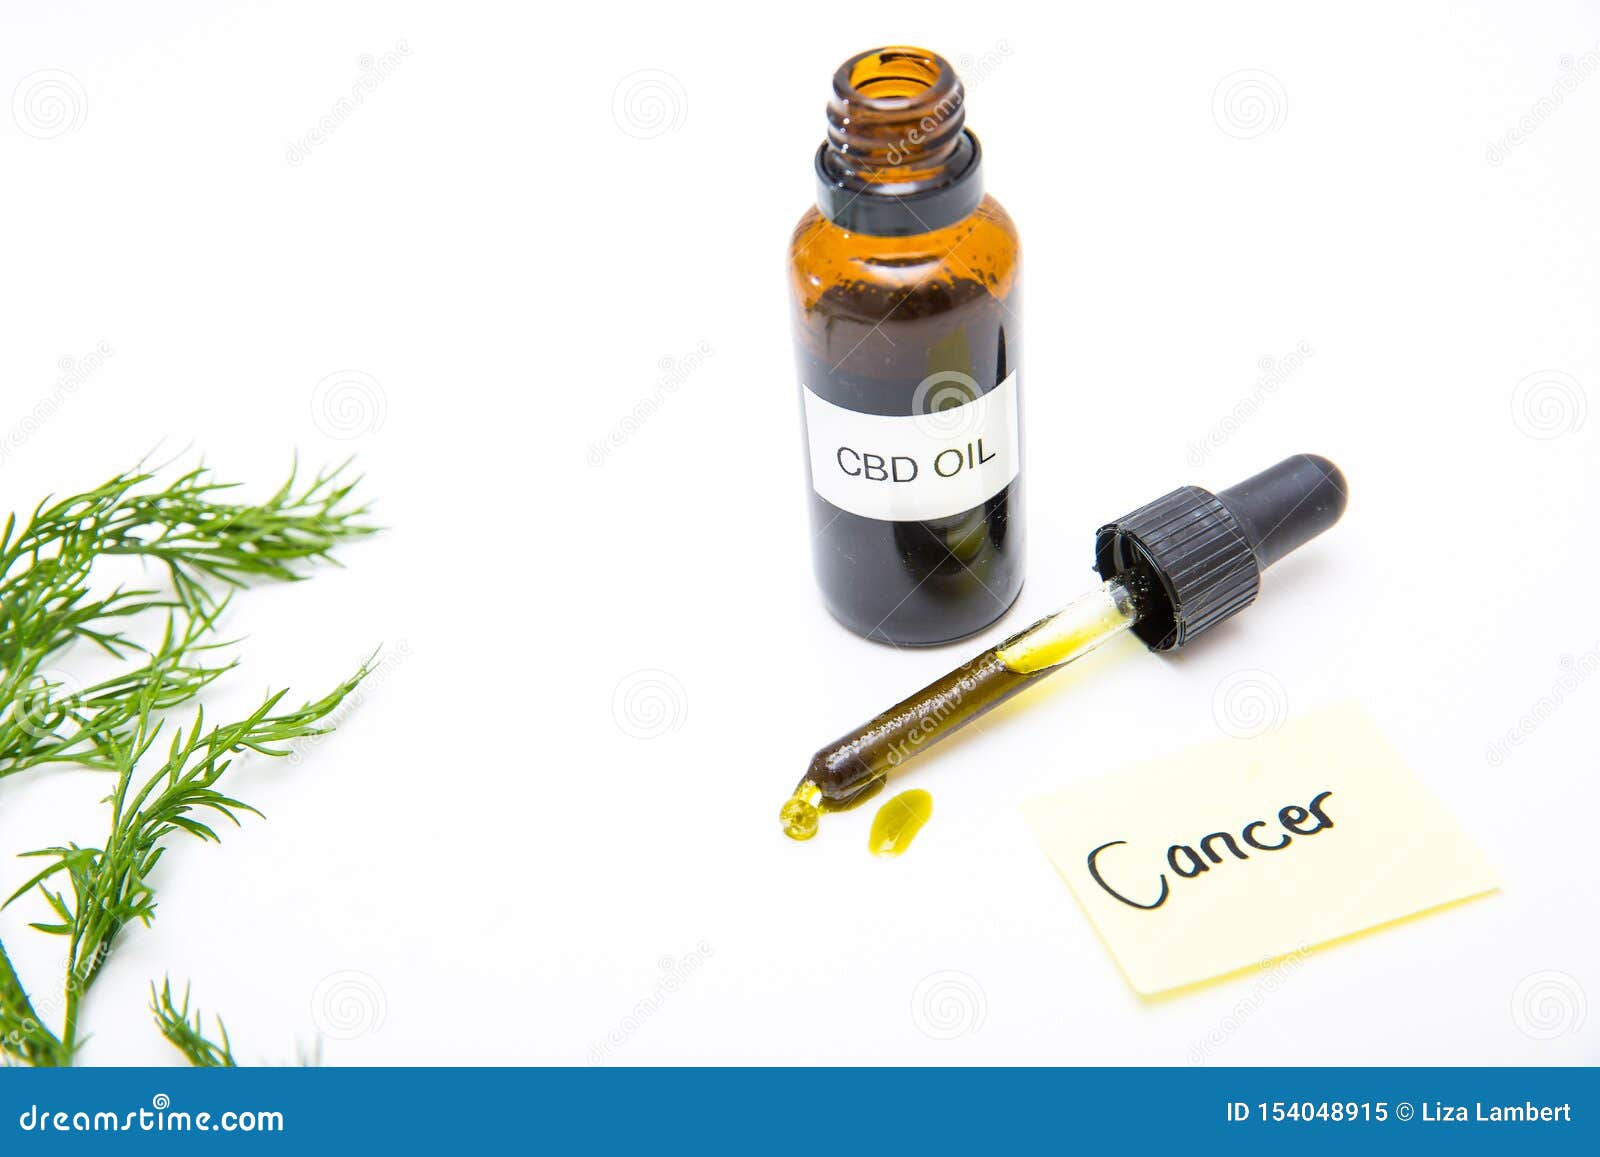 CBC OIL PENSACOLA - Cbd|Oil|Benefits|Cbc|Effects|Pain|Study|Health|Thc|Products|Cannabinoids|Studies|Research|Anxiety|Cannabis|Symptoms|Evidence|People|System|Disease|Treatment|Inflammation|Hemp|Body|Receptors|Disorders|Brain|Plant|Cells|Side|Effect|Blood|Patients|Cancer|Product|Skin|Marijuana|Properties|Cannabidiol|Cannabinoid|Cbd Oil|Cbd Products|Cbc Oil|Side Effects|Endocannabinoid System|Chronic Pain|Multiple Sclerosis|Pain Relief|Cannabis Plant|Cbd Oil Benefits|Blood Pressure|Health Benefits|High Blood Pressure|Anti-Inflammatory Properties|Neuropathic Pain|Animal Studies|Hemp Plant|Hemp Oil|Anxiety Disorders|Cbd Product|Immune System|Clinical Trials|Cbd Gummies|Nerve Cells|Nervous System|Entourage Effect|Hemp Seed Oil|United States|Cbd Oils|Drug Administration